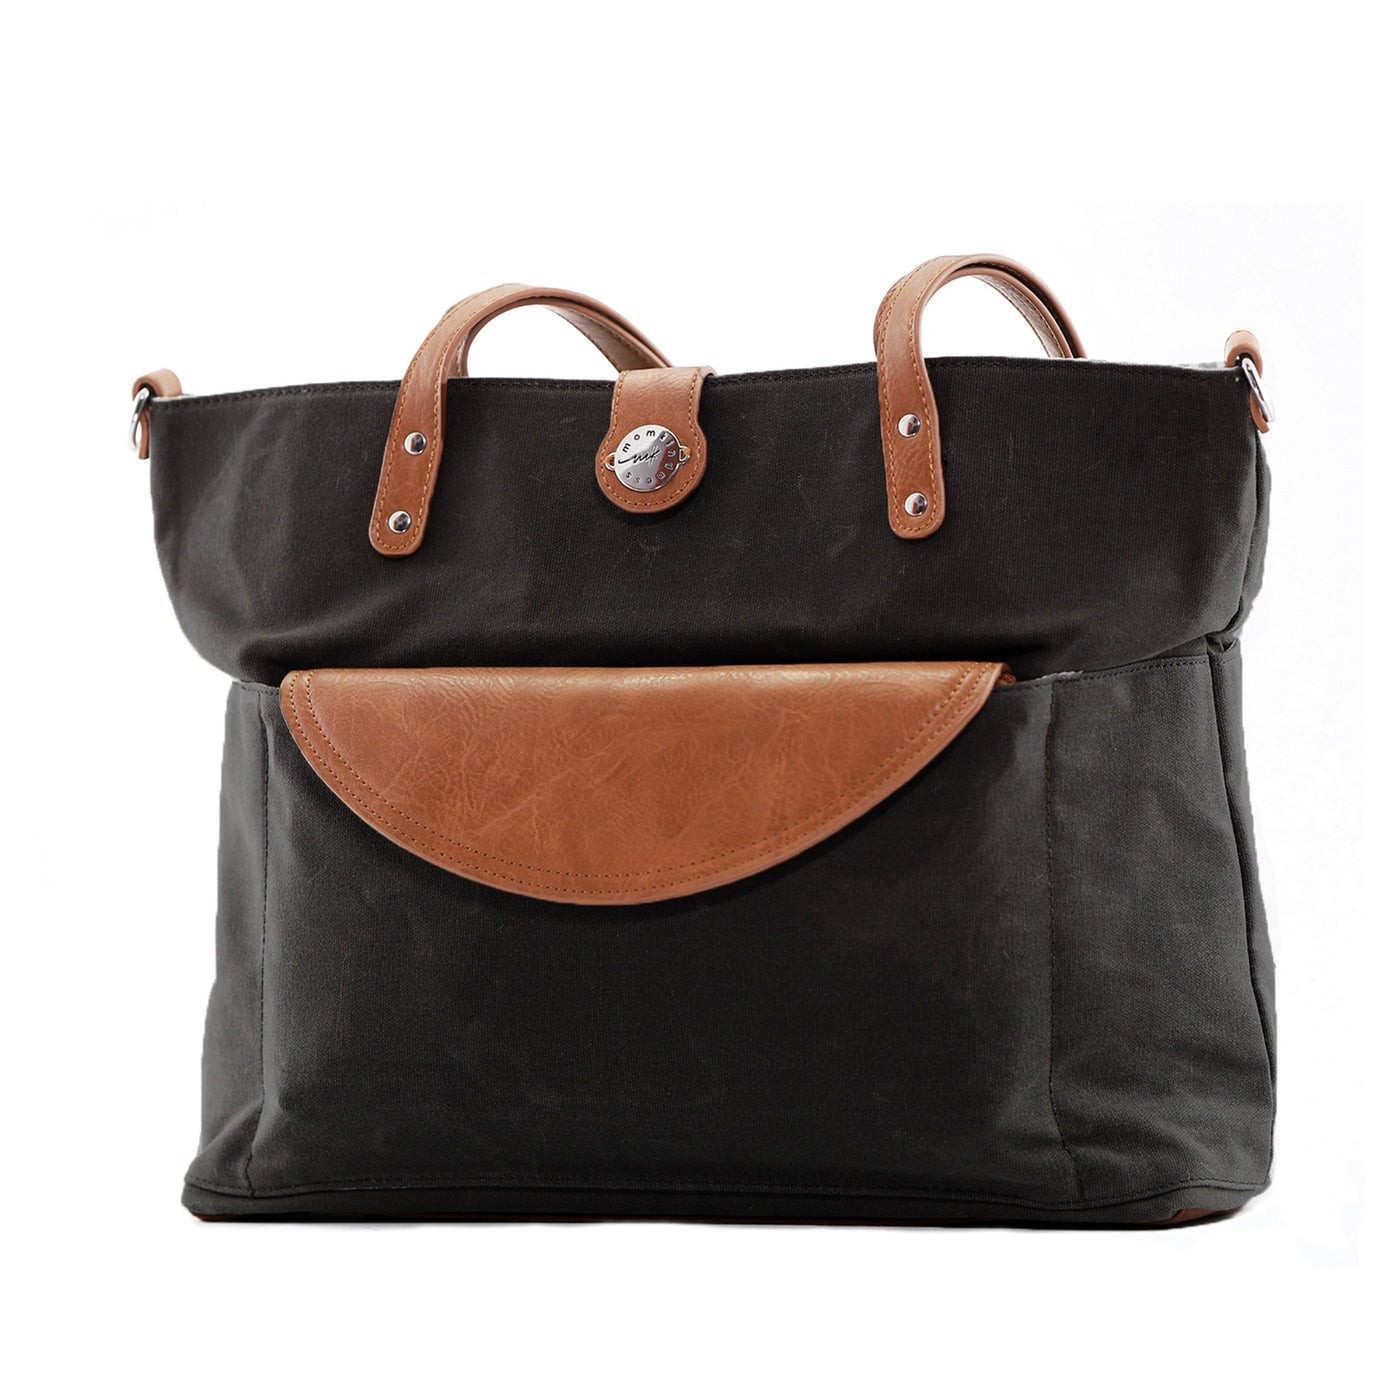 Black waxed canvas tote with brown vegan leather accents and brown clutch in front pocket, all on a white background. 